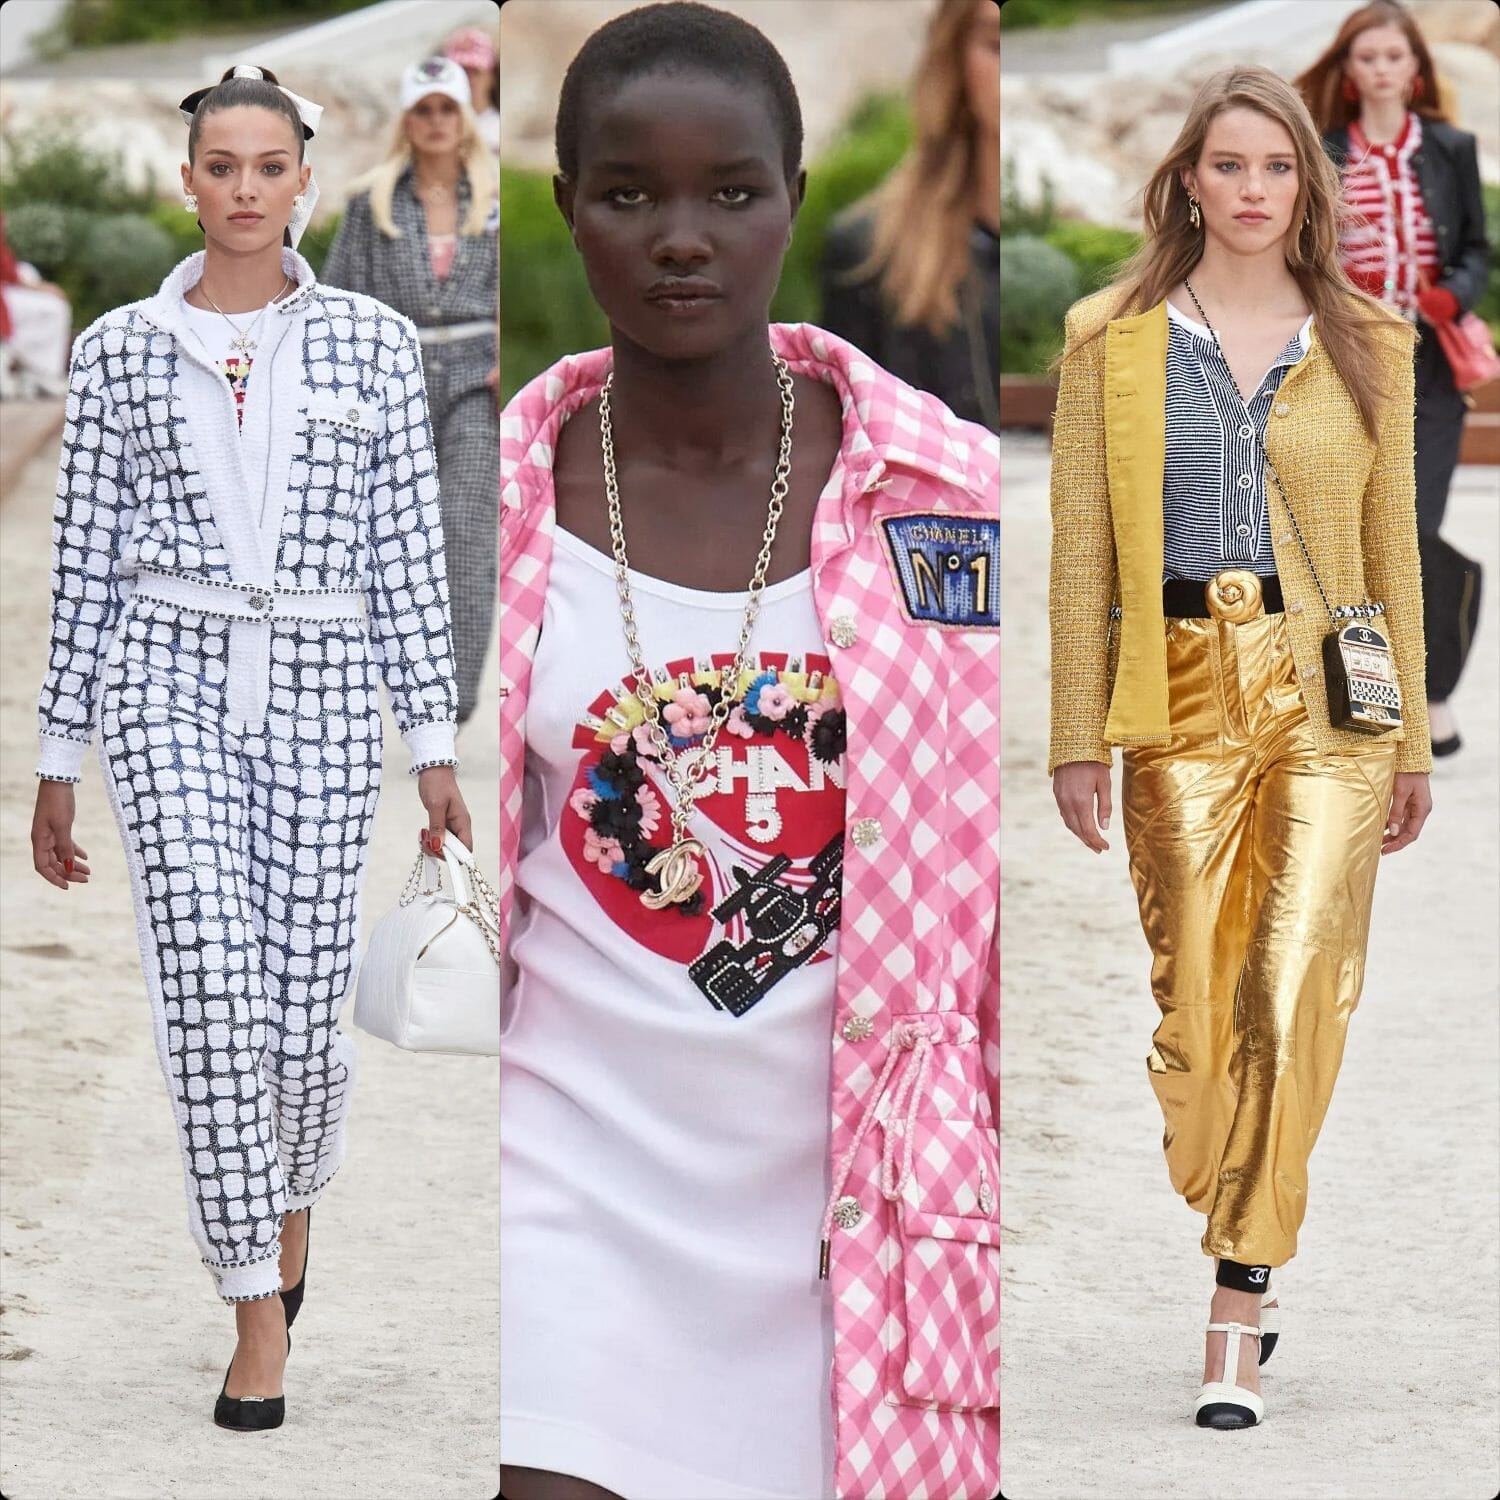 Chanel Resort 2019 Fashion Collection: Styles in the Runway [PHOTOS]